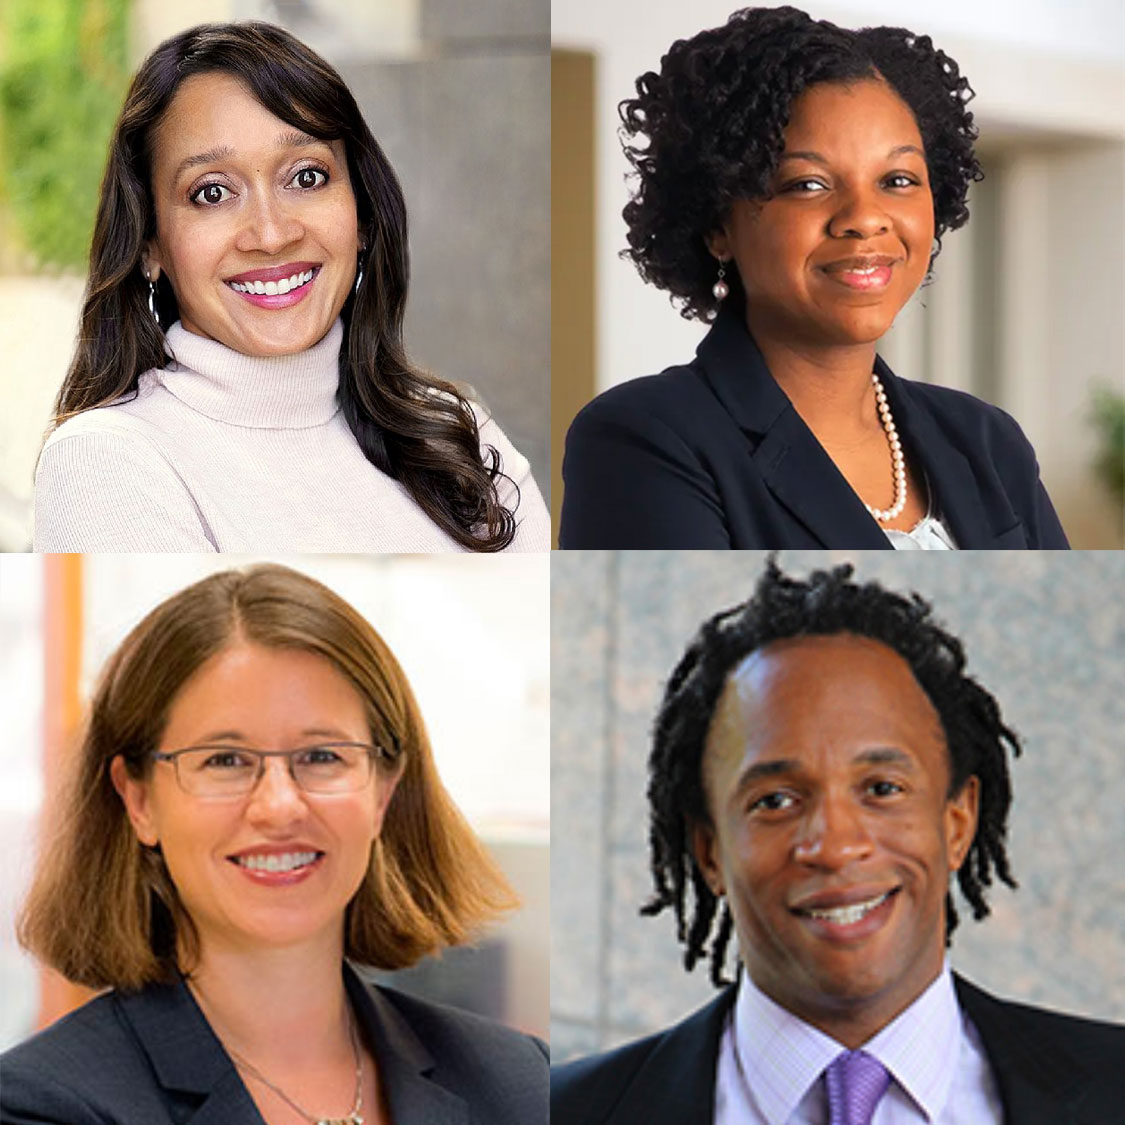 AUWCL welcomes new faculty for 2022-23